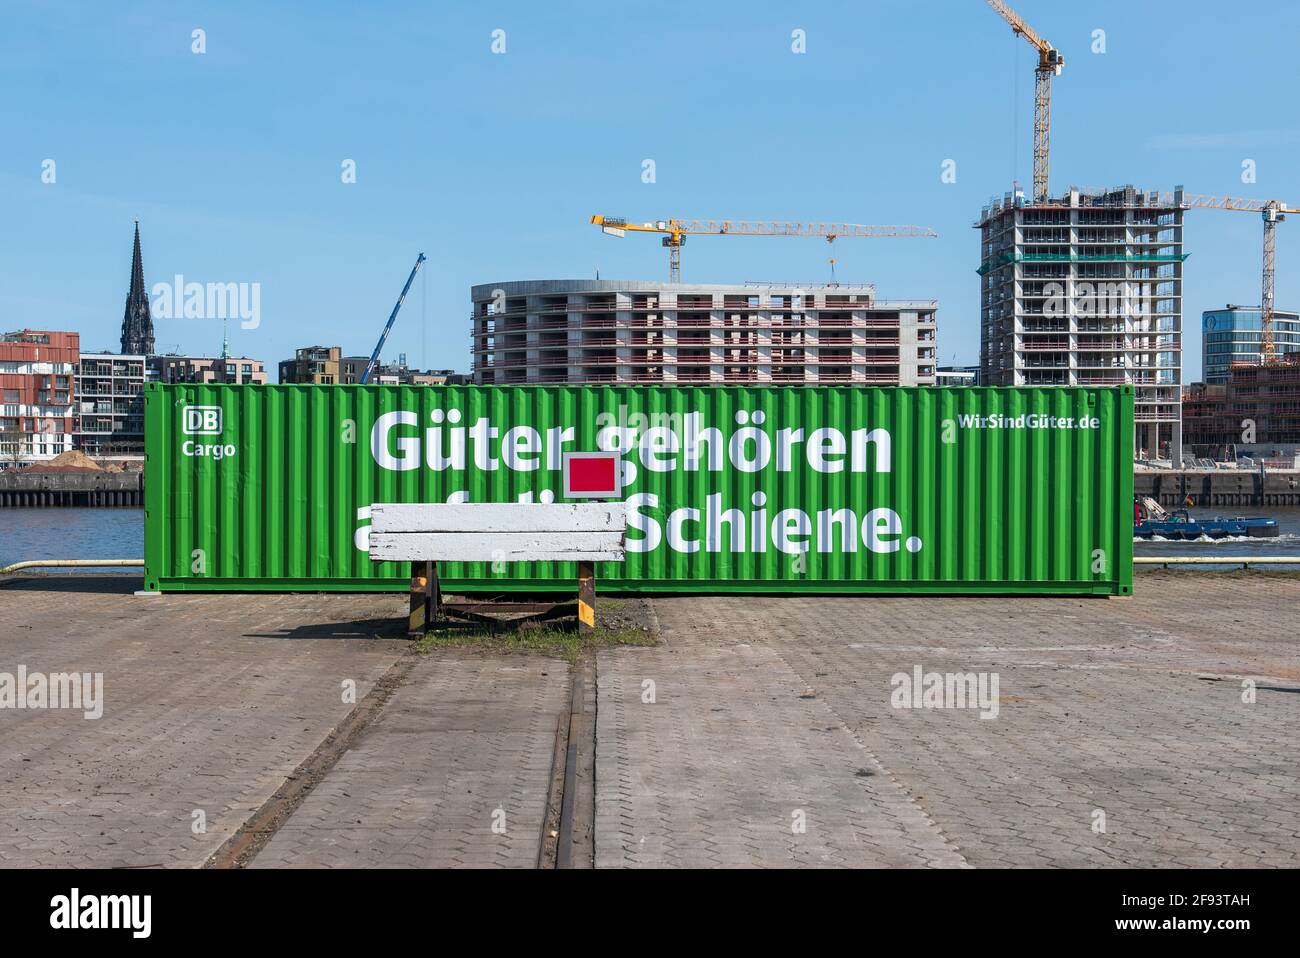 Hamburg, Germany. 16th Apr, 2021. A container with the inscription 'Güter gehören auf die Schiene' (Goods belong on the rails) stands on a track at a terminal at the port during a Deutsche Bahn press event. With this campaign, Deutsche Bahn wants to promote more climate-friendly freight transport. Credit: Daniel Bockwoldt/dpa/Daniel Bockwoldt/dpa/Alamy Live News Stock Photo